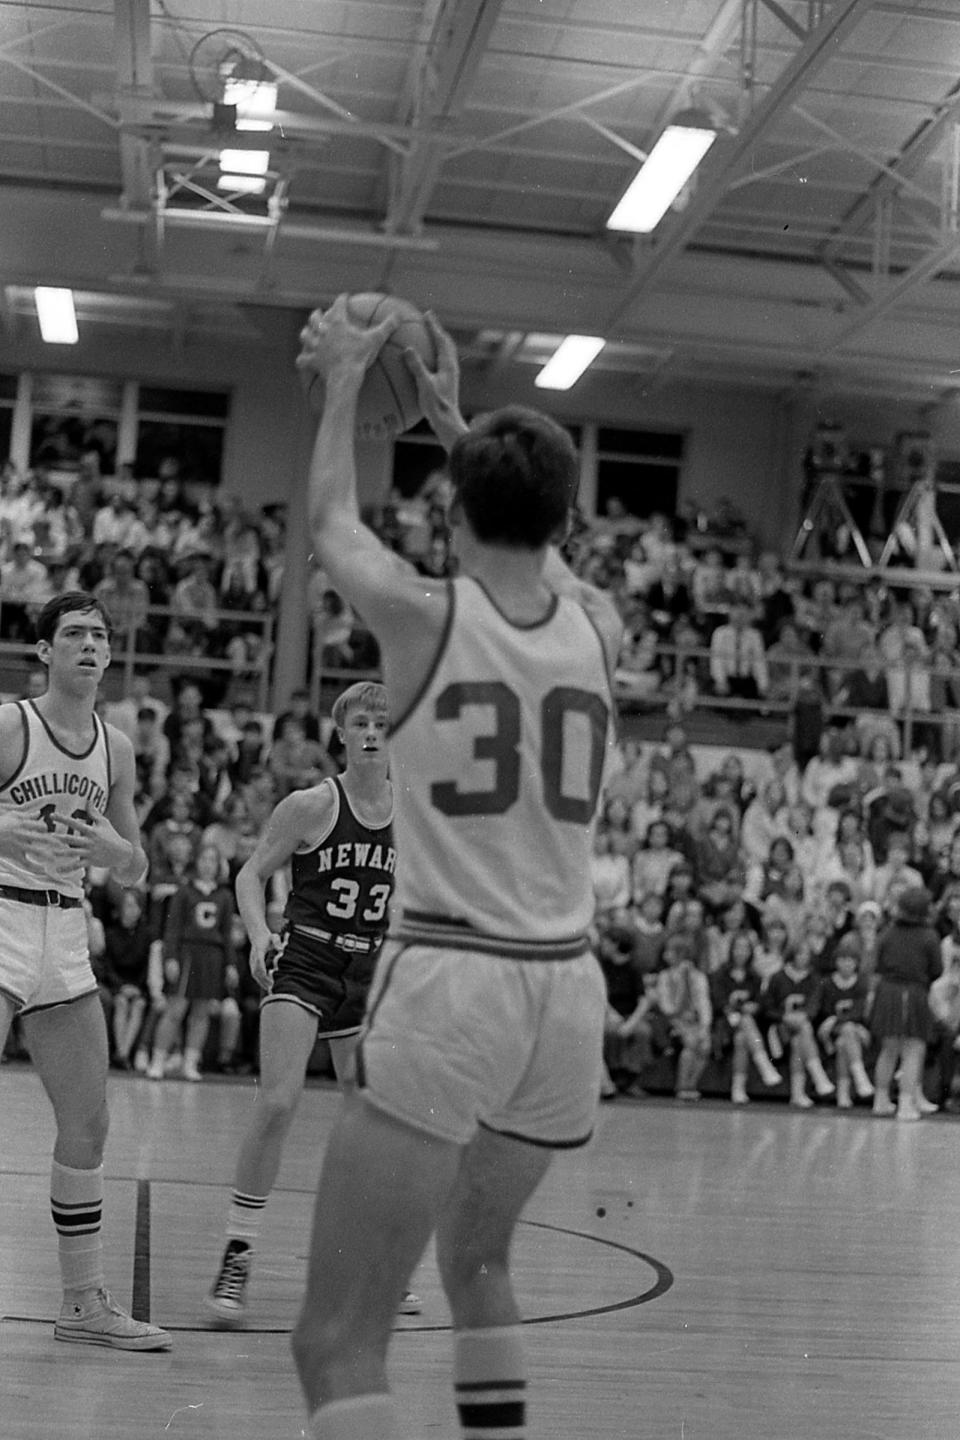 Chillicothe's Jim Johnson (30) with the ball during the game against Newark. The Newark Wildcats came from behind to beat the Chillicothe Cavaliers 47-46 at Hatton Memorial Gym on Jan. 24, 1969.